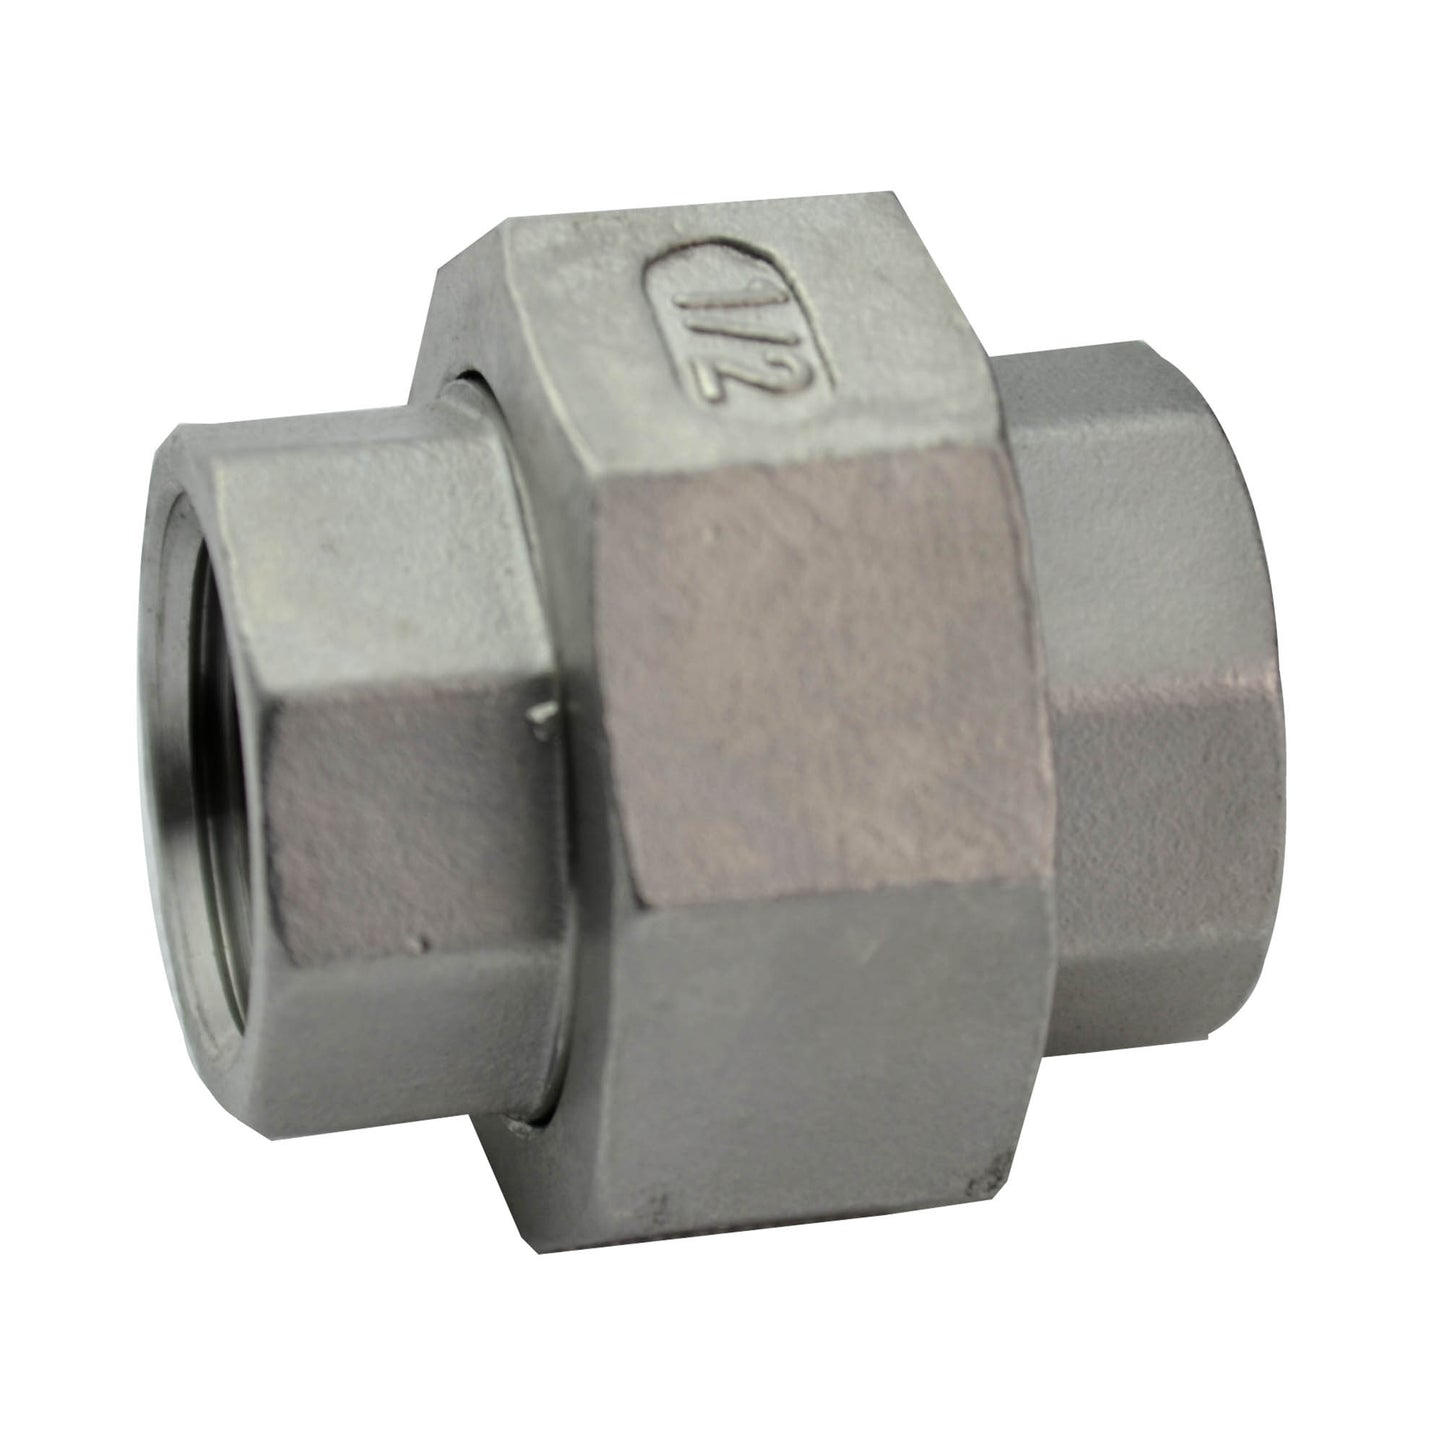 1/2" Union - Stainless Steel Fitting